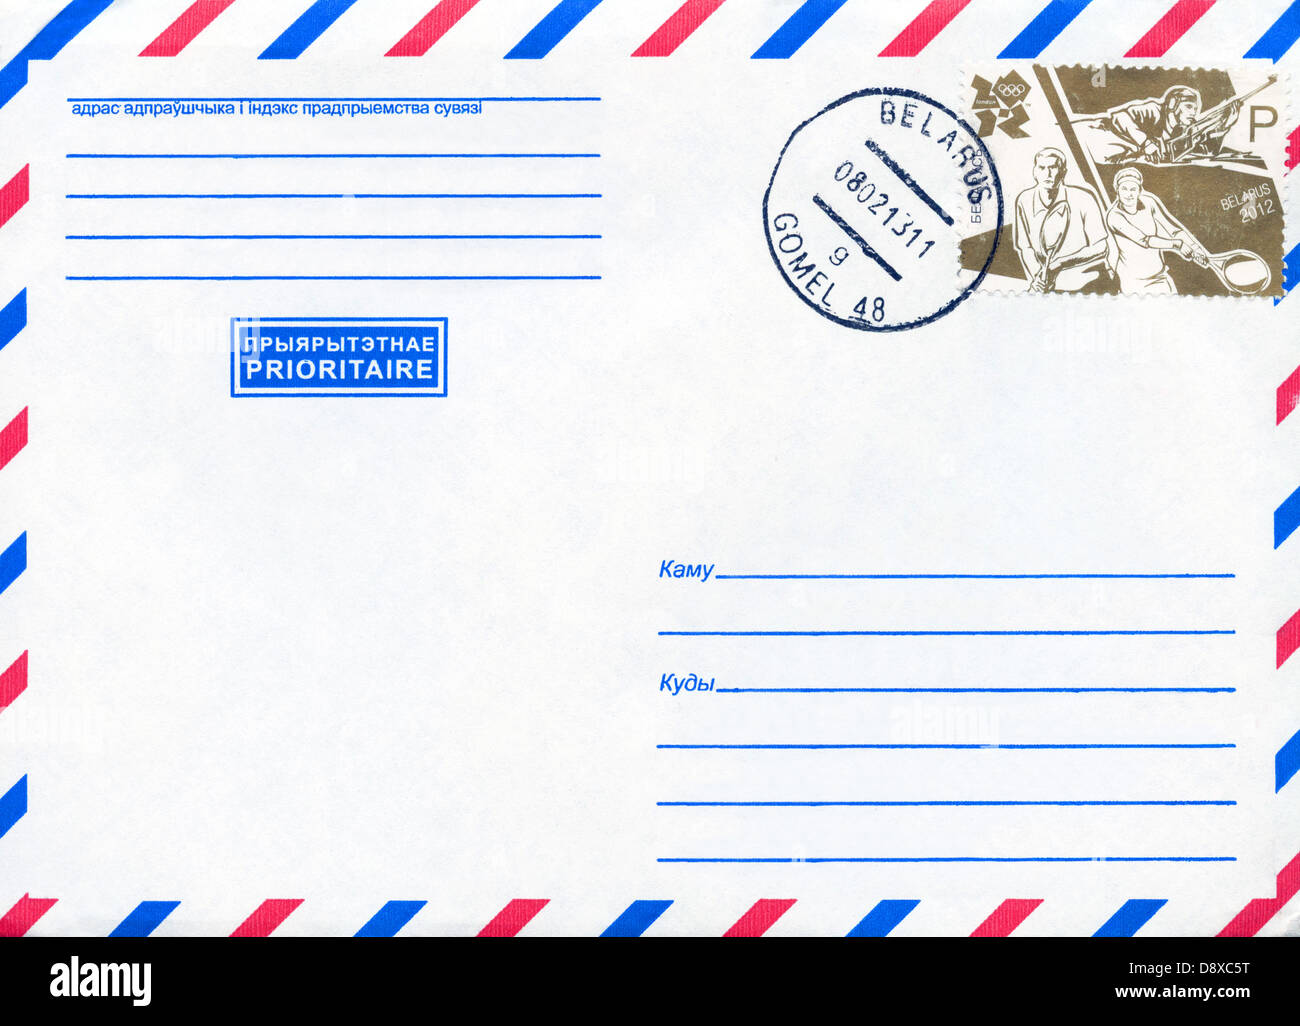 Stamped envelope from Belarus Stock Photo